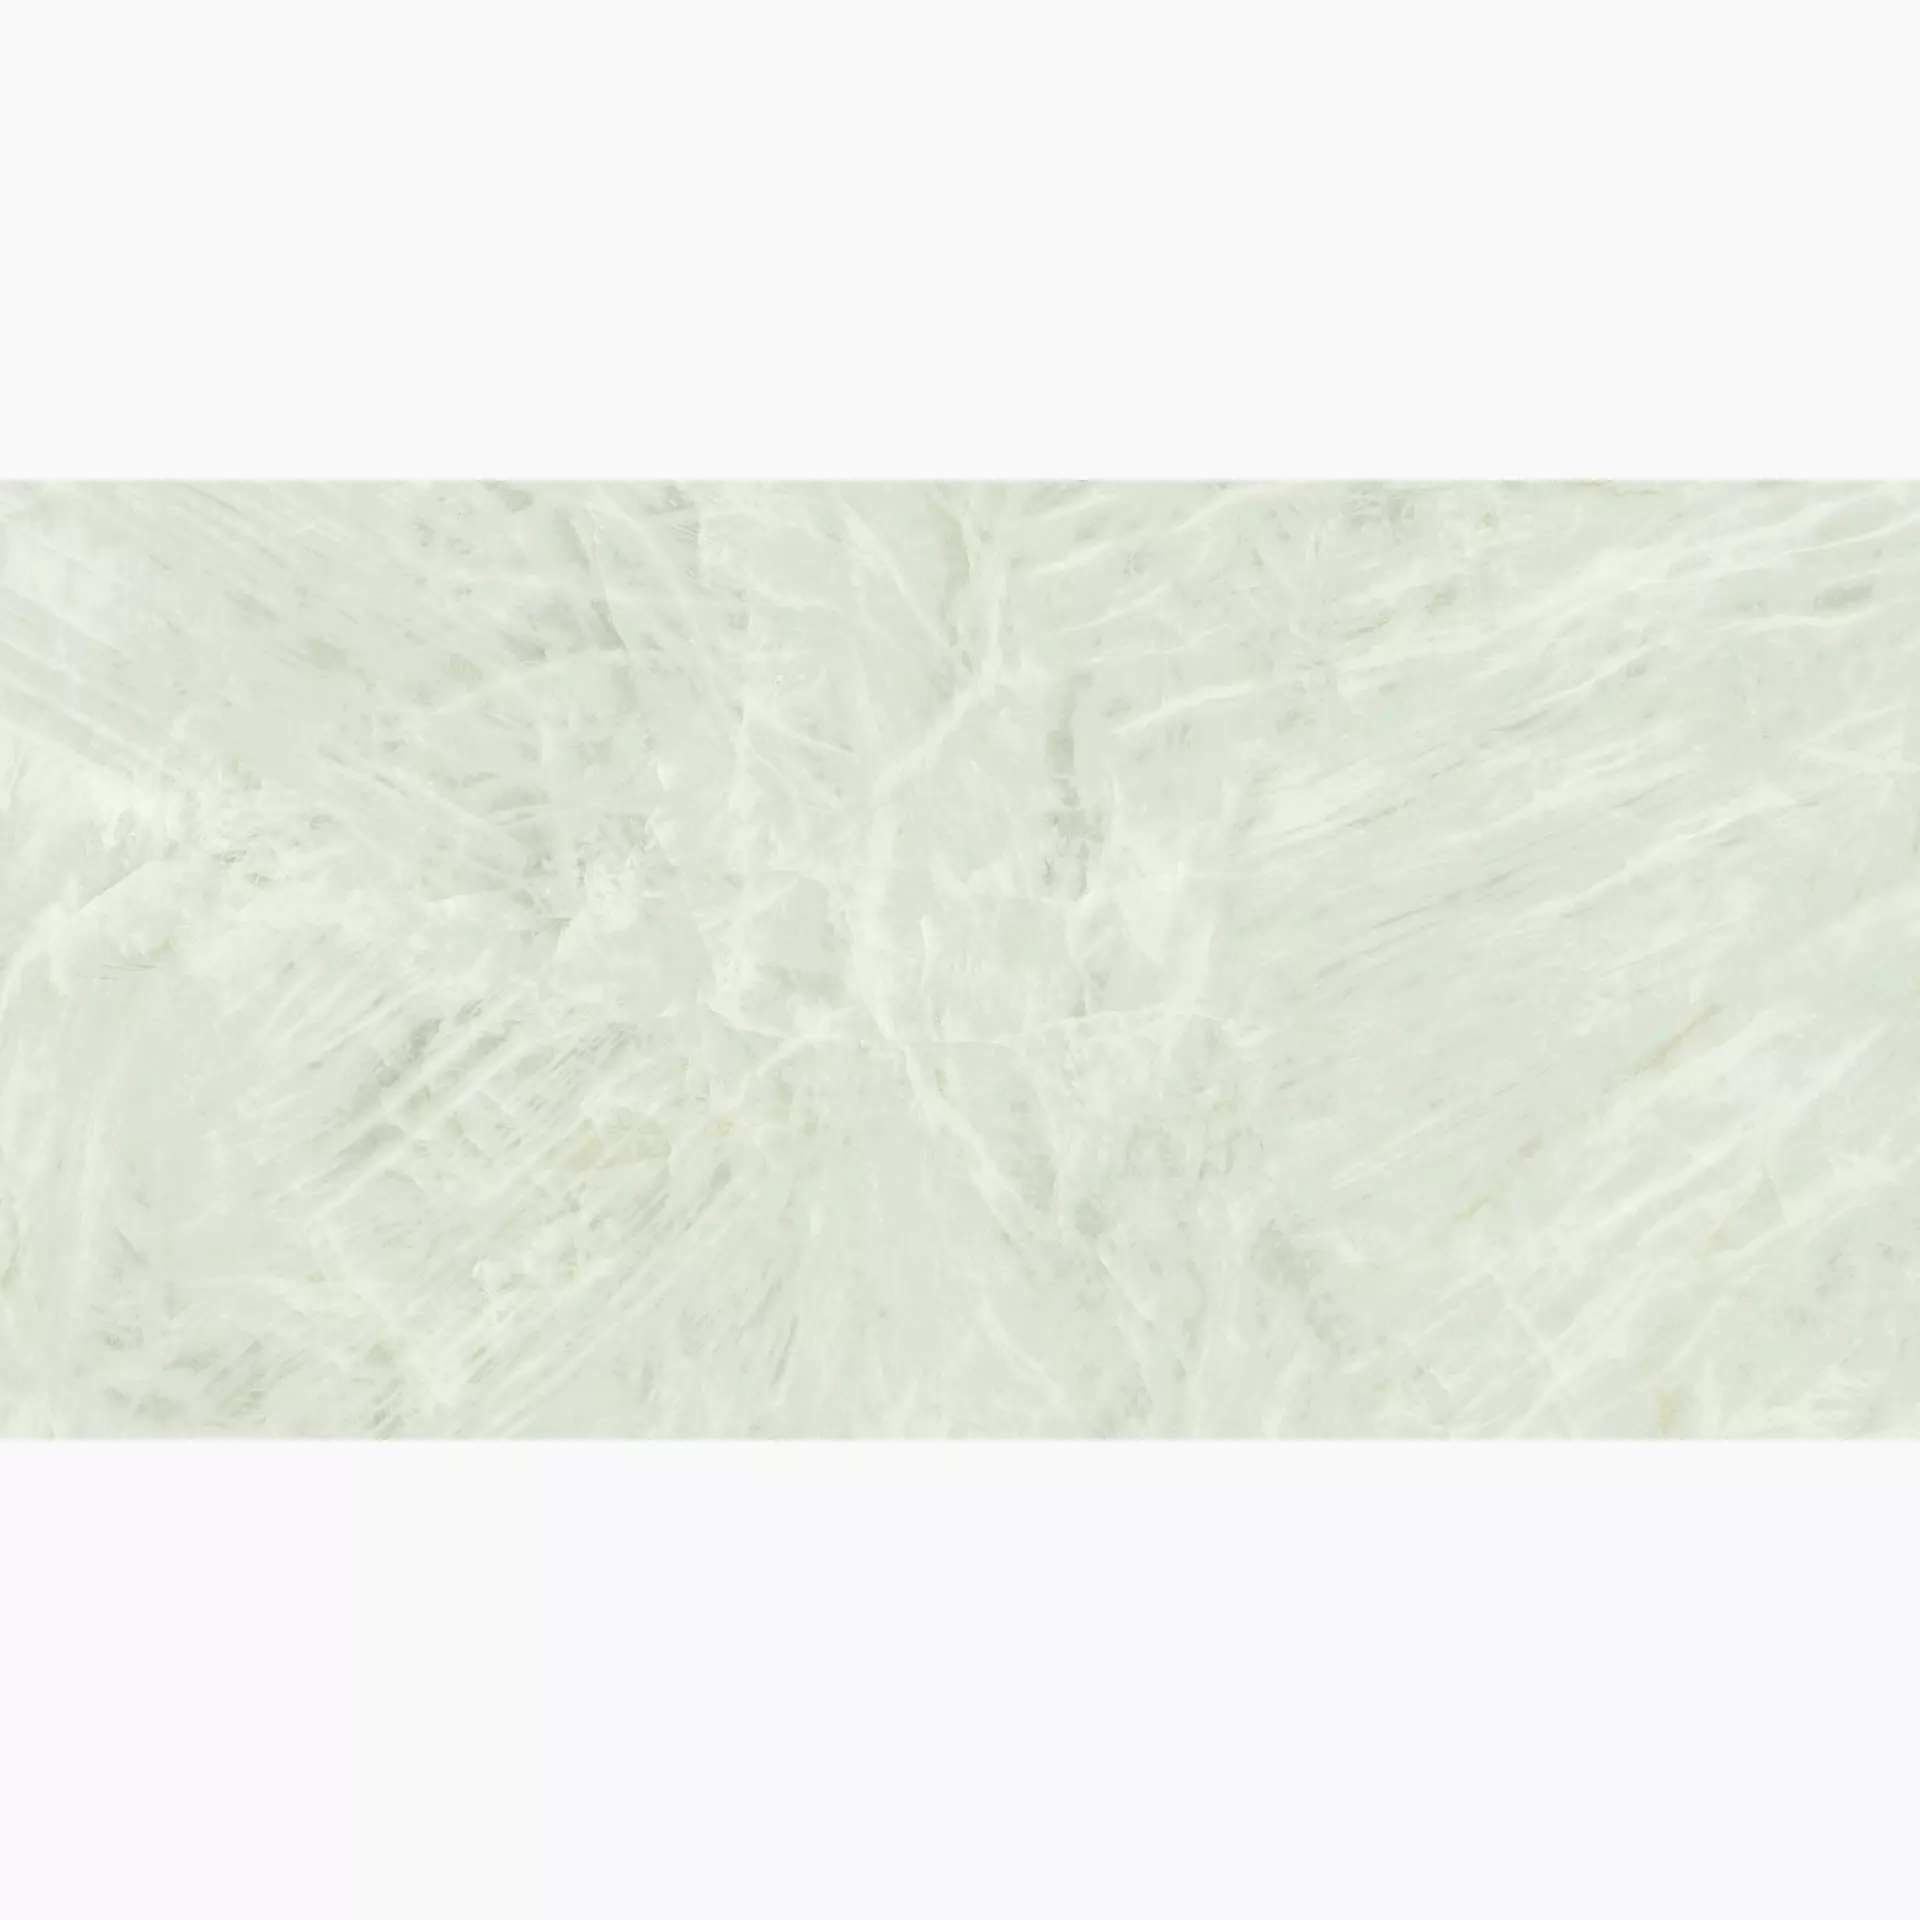 Atlasconcorde Marvel Gala Crystal White Lappato AFXR 60x120cm rectified 9mm